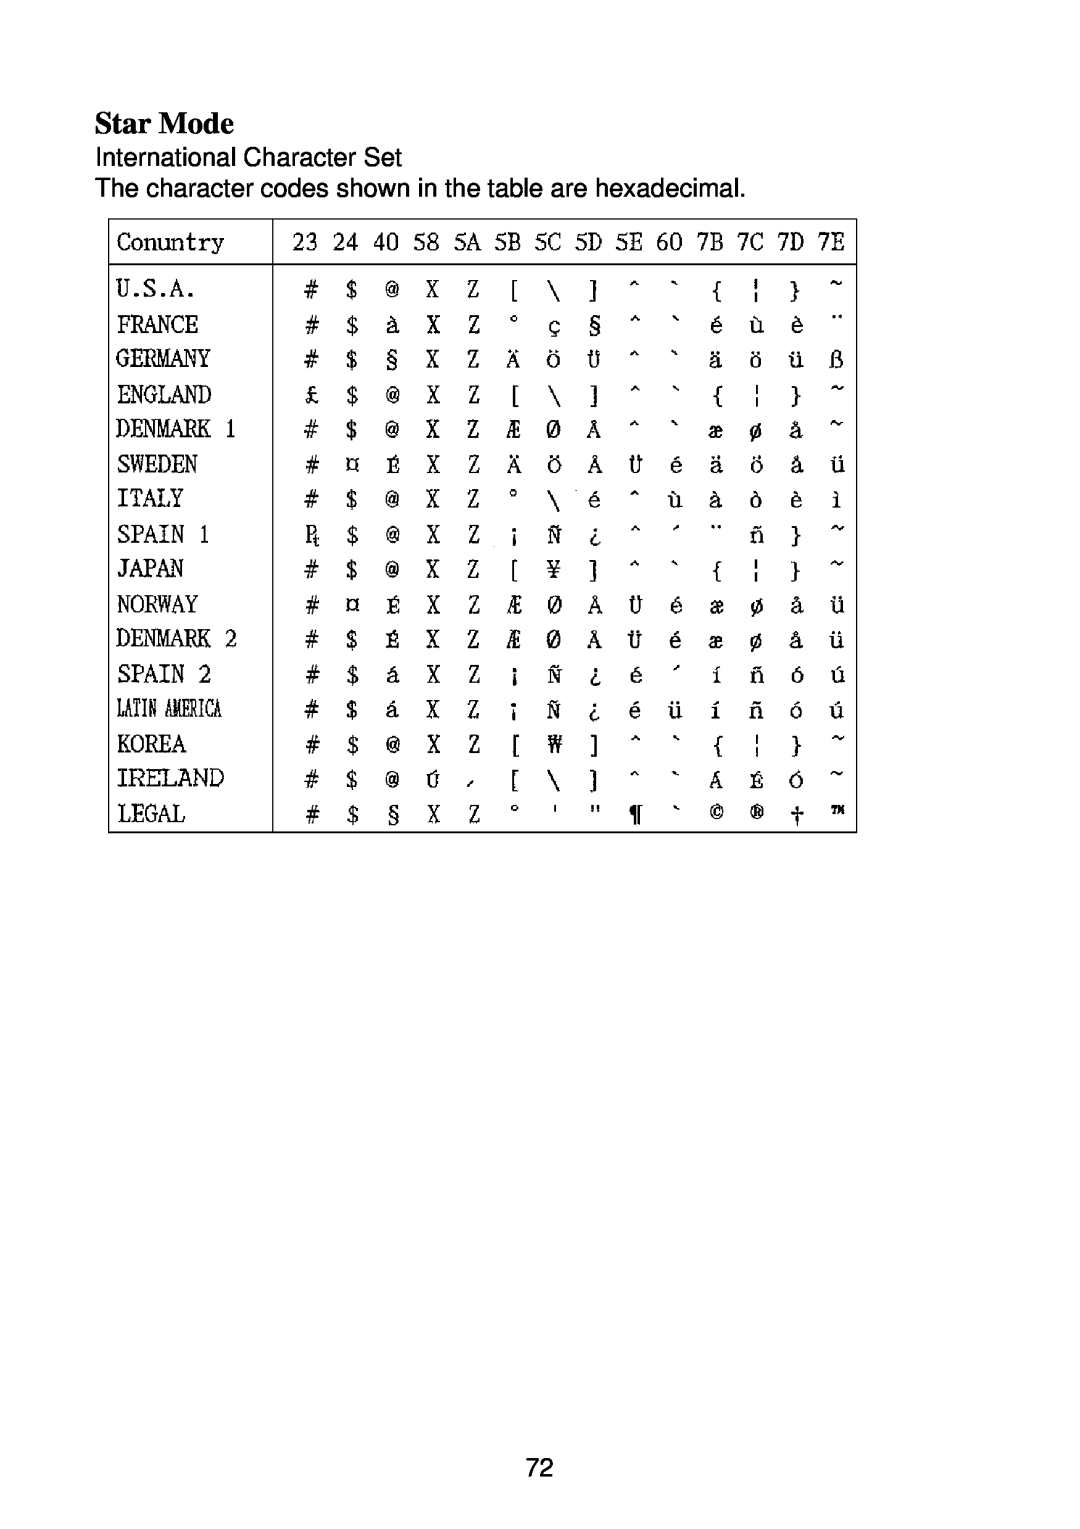 Star Micronics SP2000 manual International Character Set, The character codes shown in the table are hexadecimal, Star Mode 